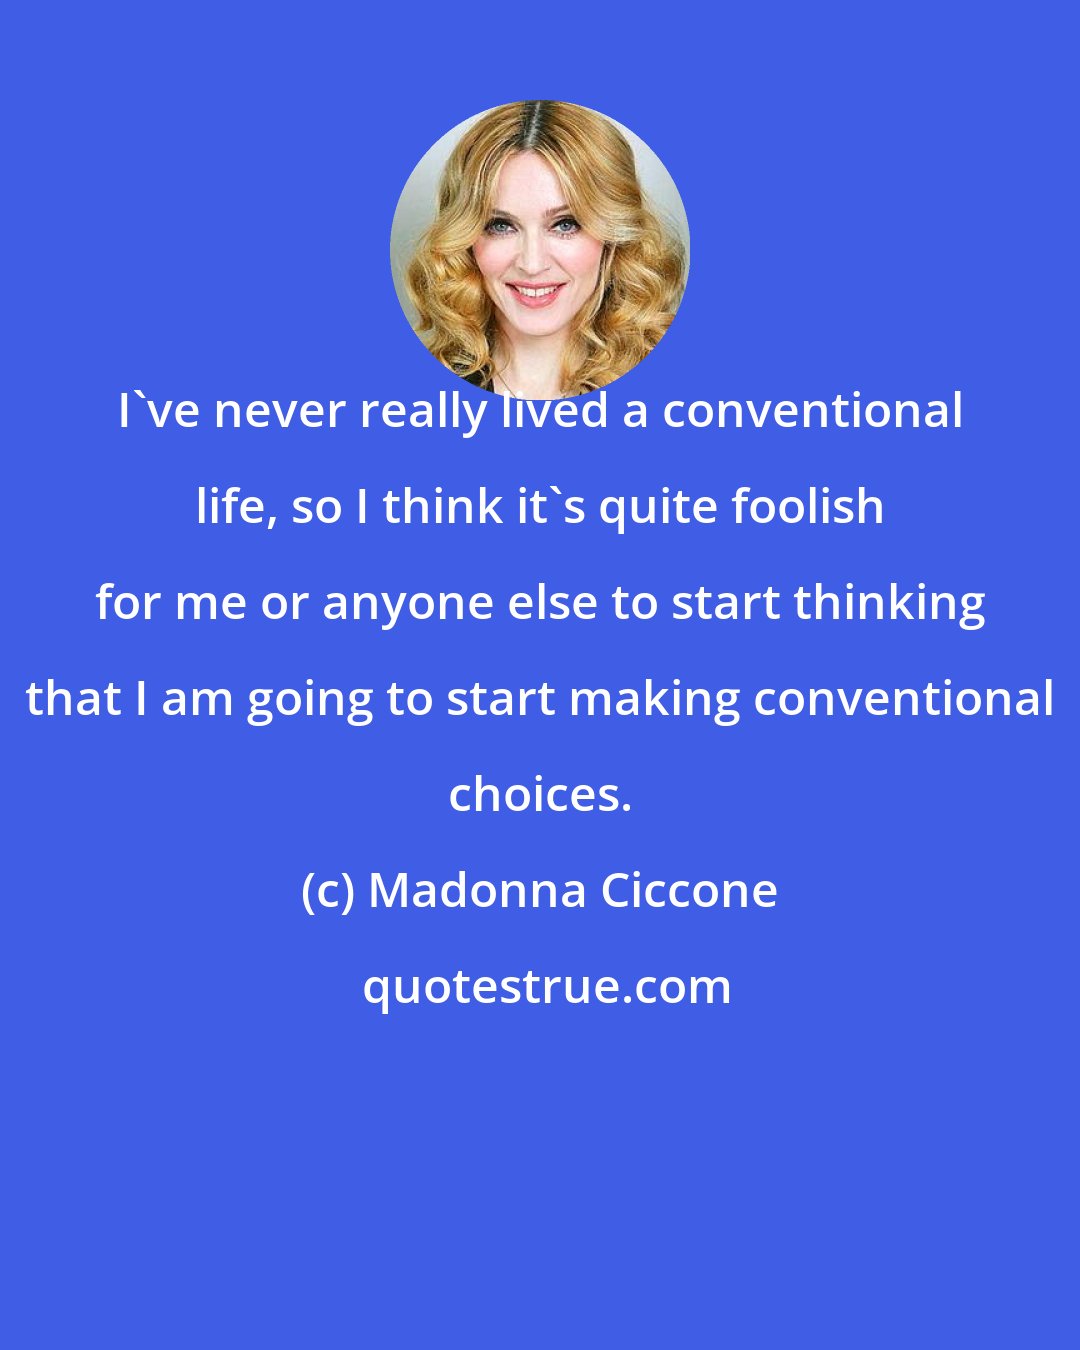 Madonna Ciccone: I've never really lived a conventional life, so I think it's quite foolish for me or anyone else to start thinking that I am going to start making conventional choices.